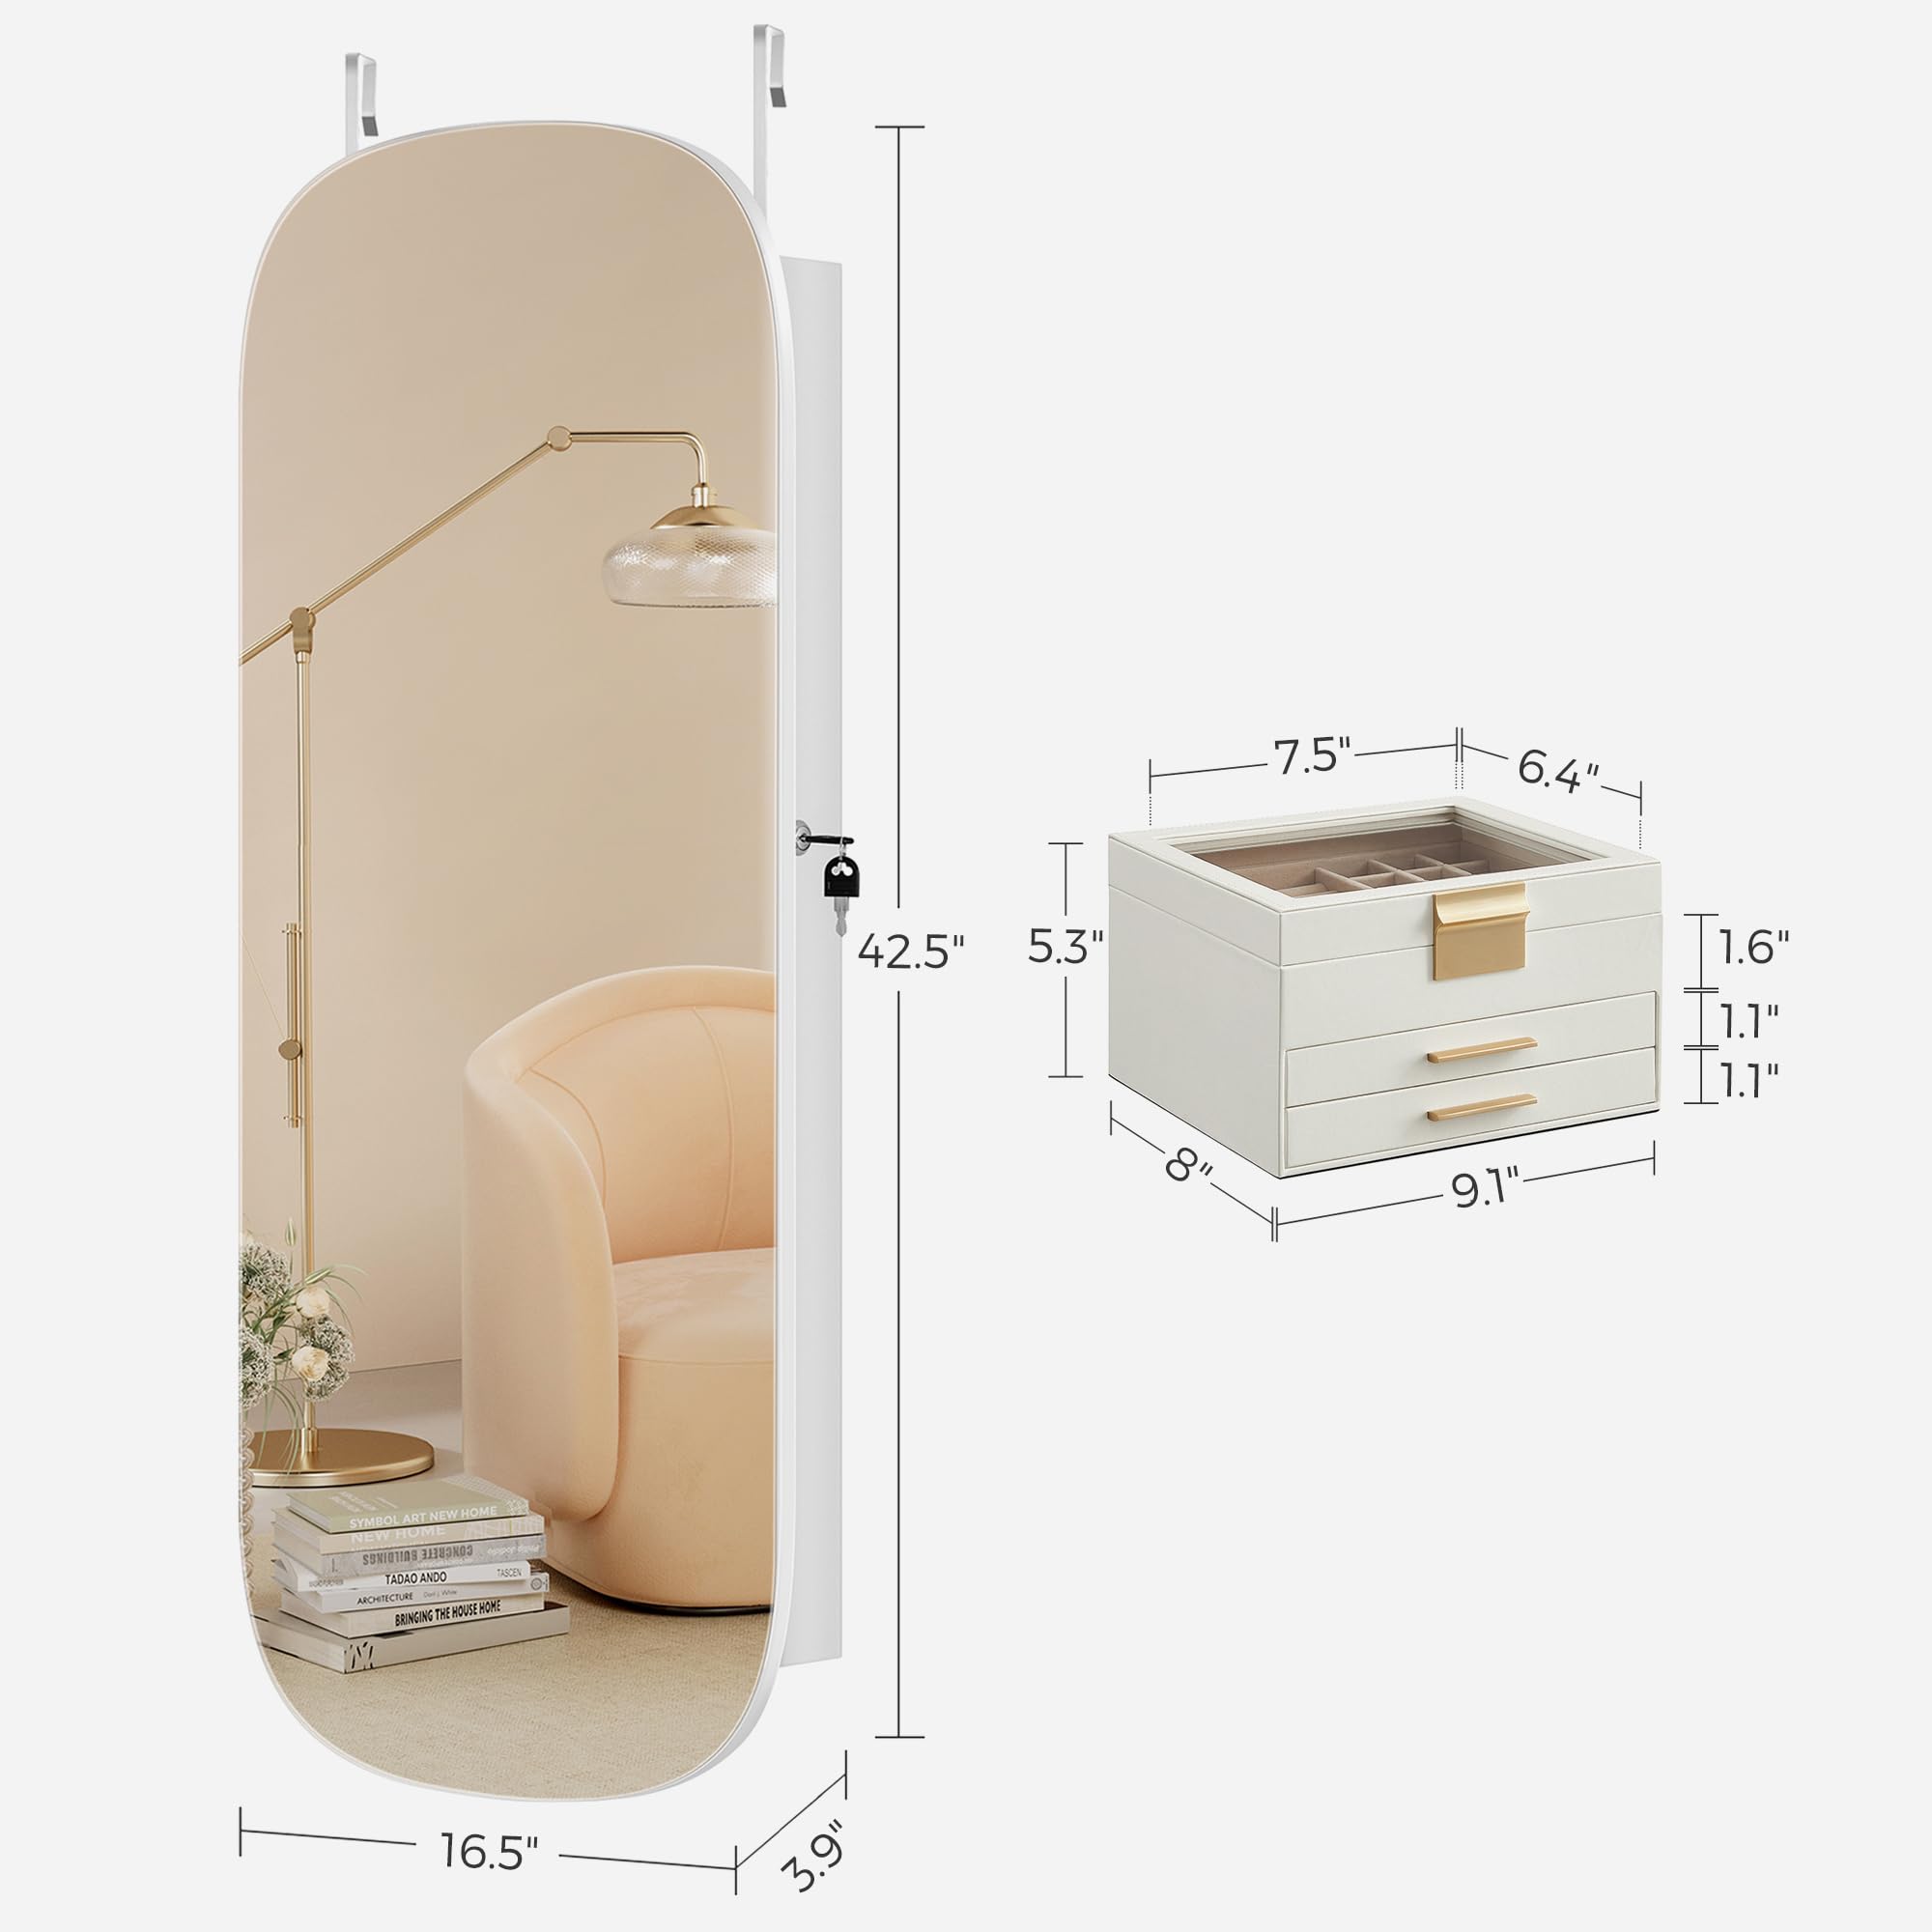 SONGMICS Jewelry Box and LED Jewelry Cabinet Bundle, Jewelry Organizer, Rounded Wide Mirror with Storage, Cloud White and Gold Color, White Surface with Greige Lining UJBC239WT and UJJC026W01